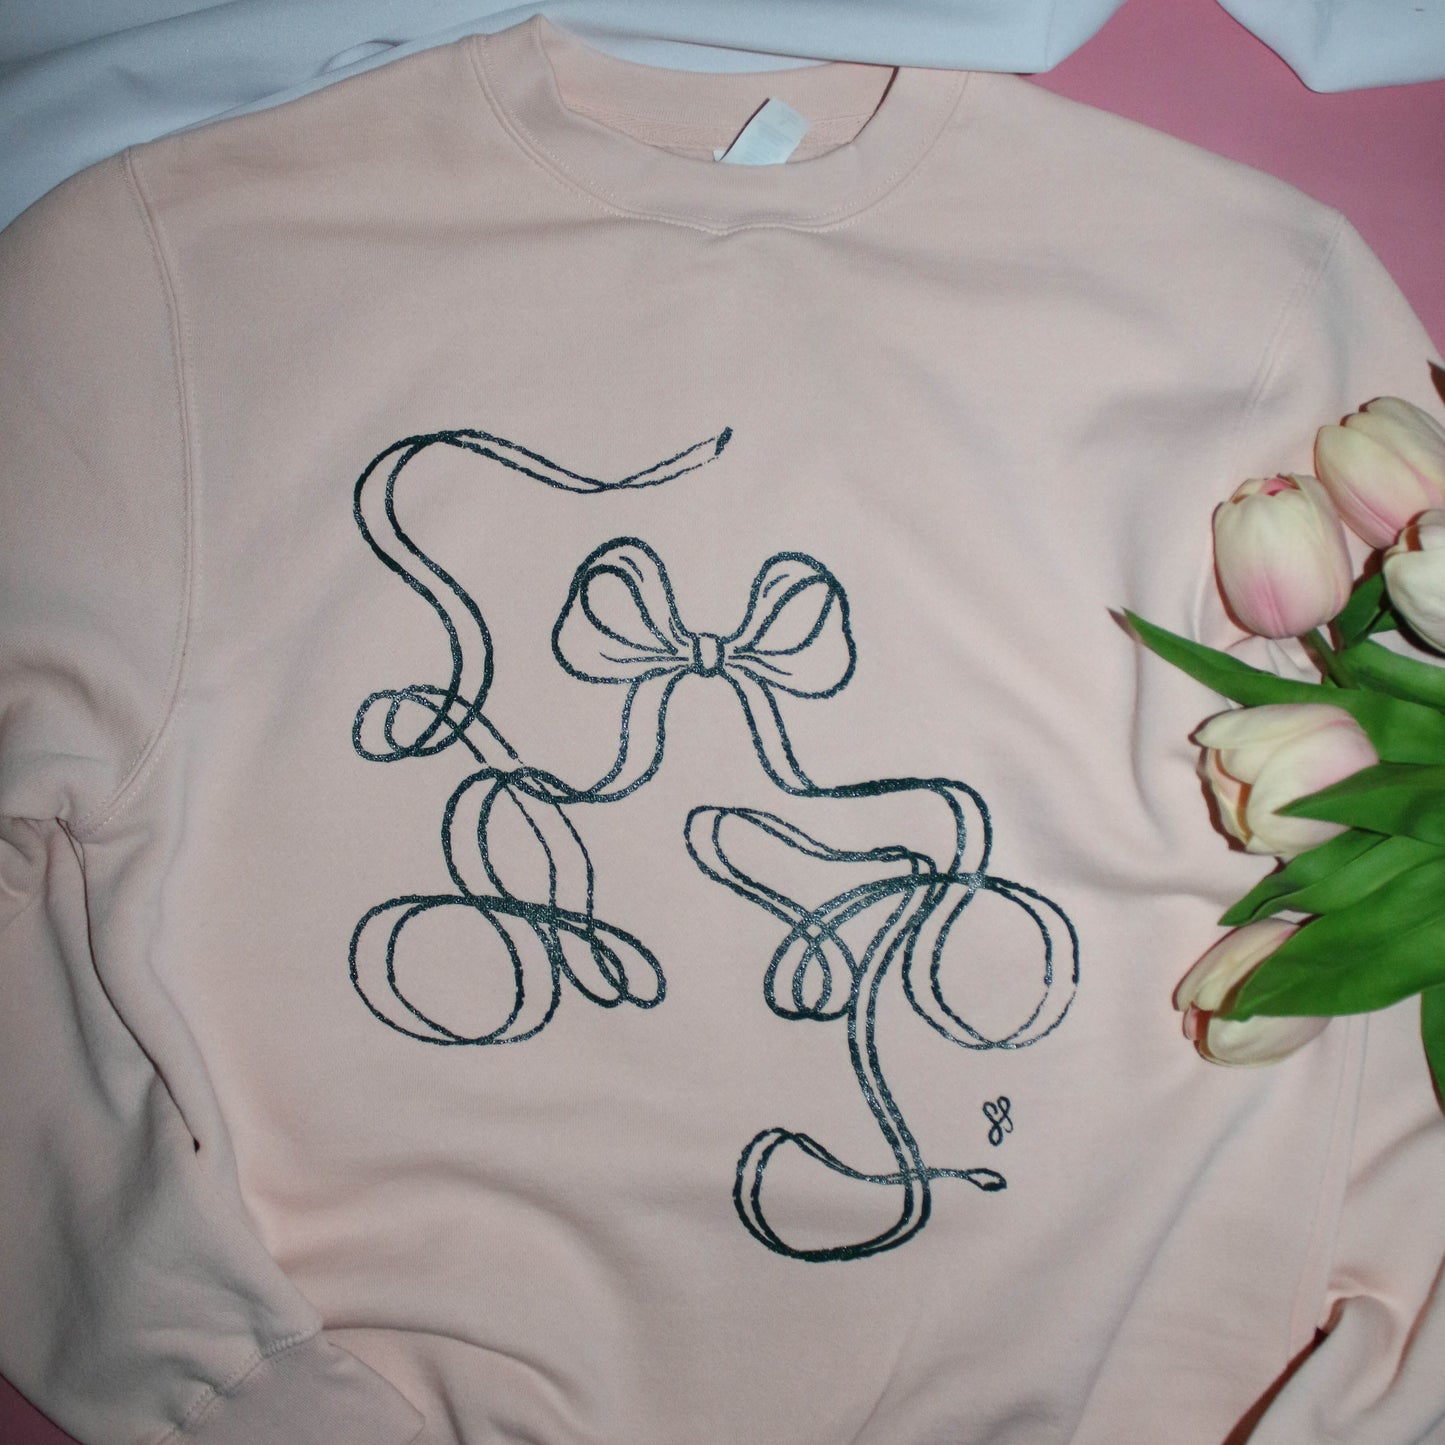 Sealed With A Bow Crewneck